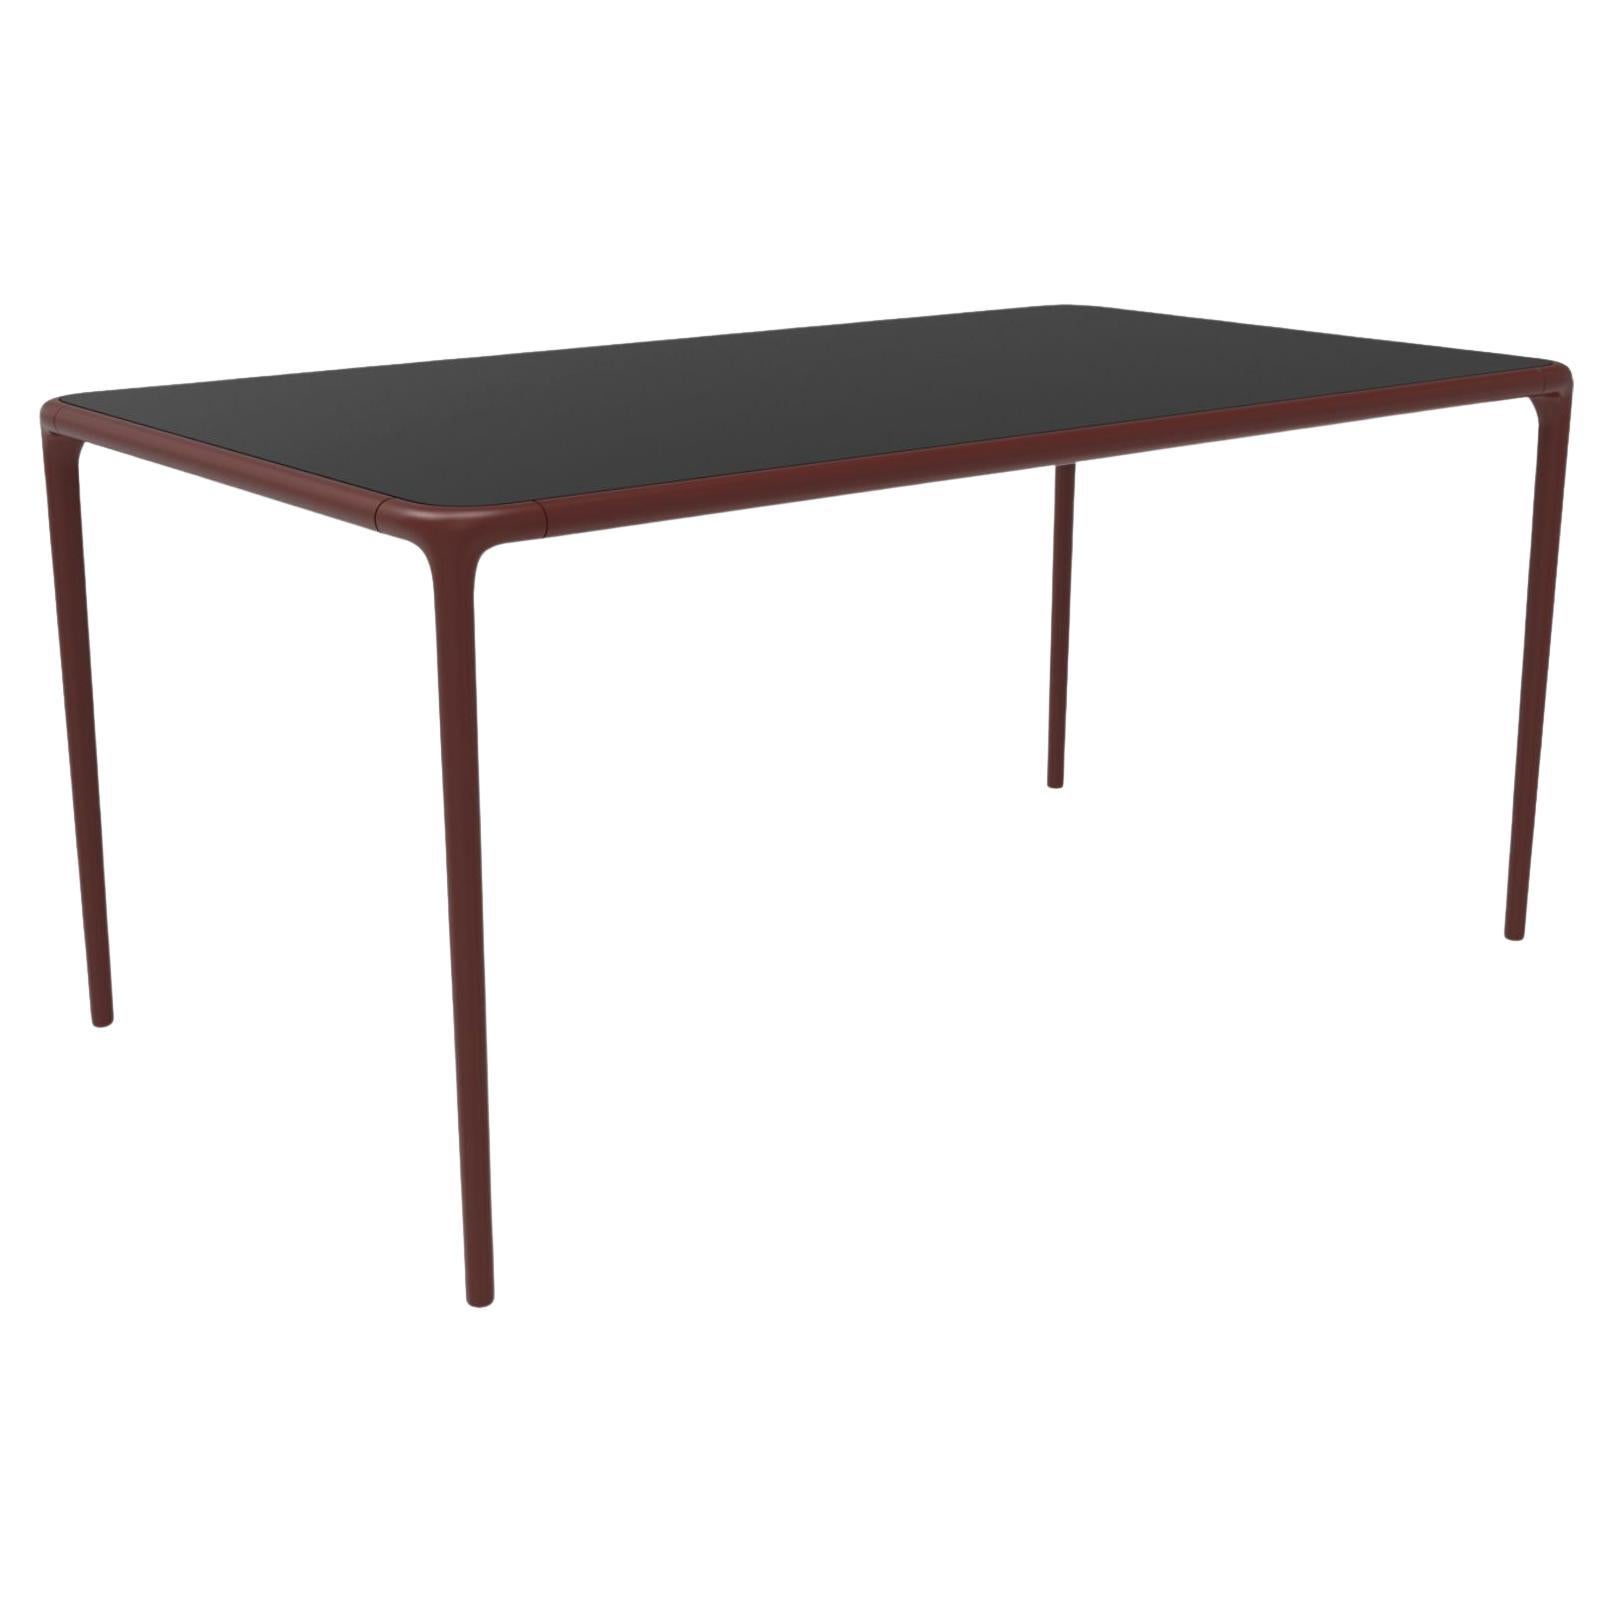 Xaloc Burgundy Glass Top Table 160 by Mowee For Sale